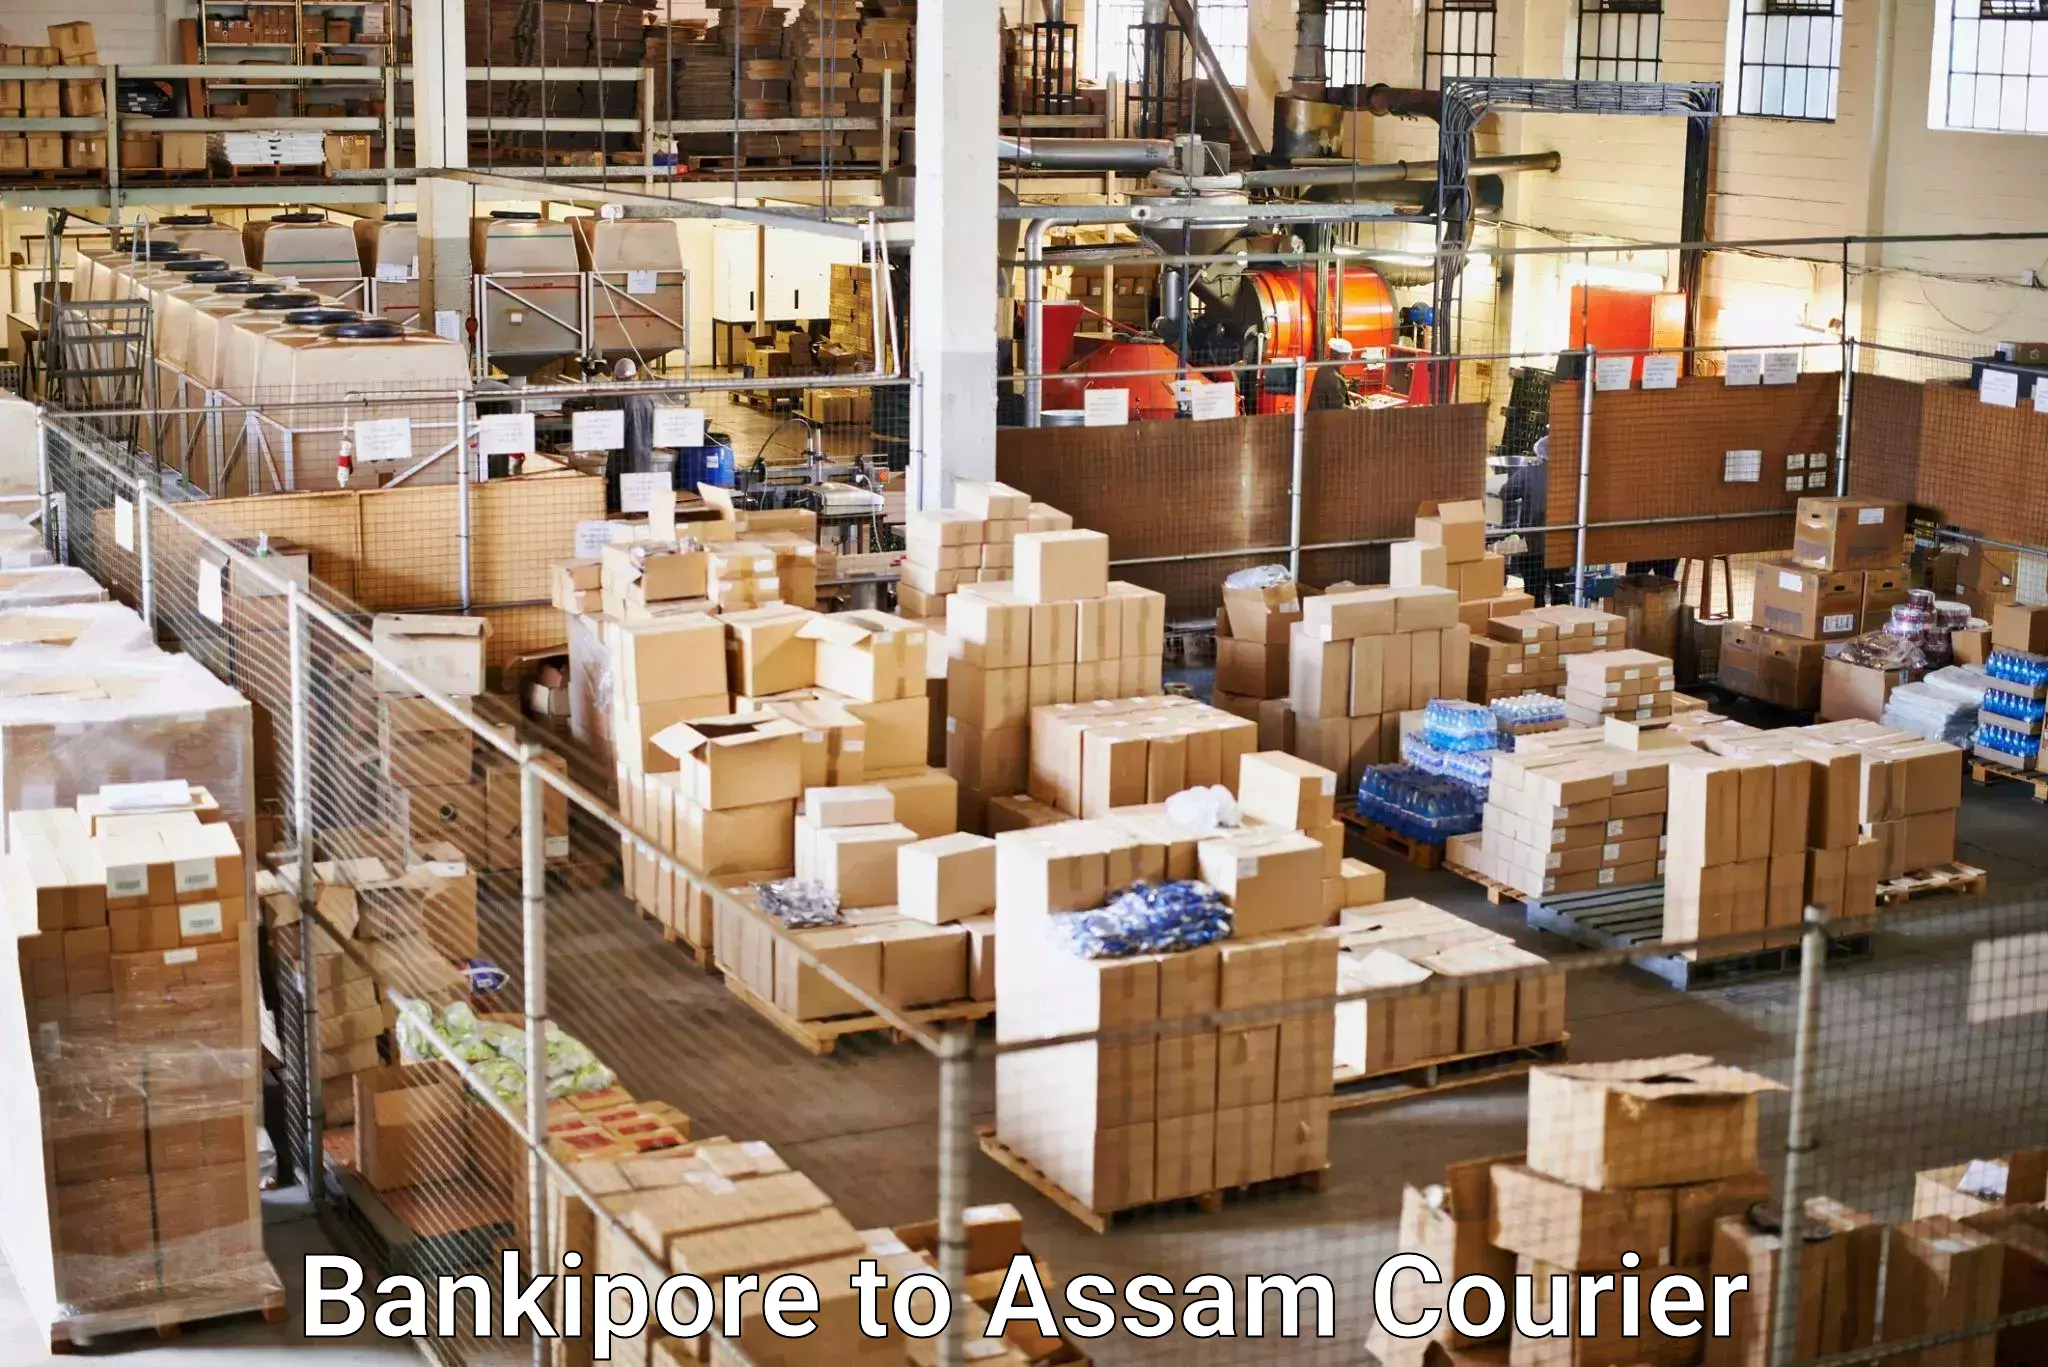 Express delivery network Bankipore to Assam